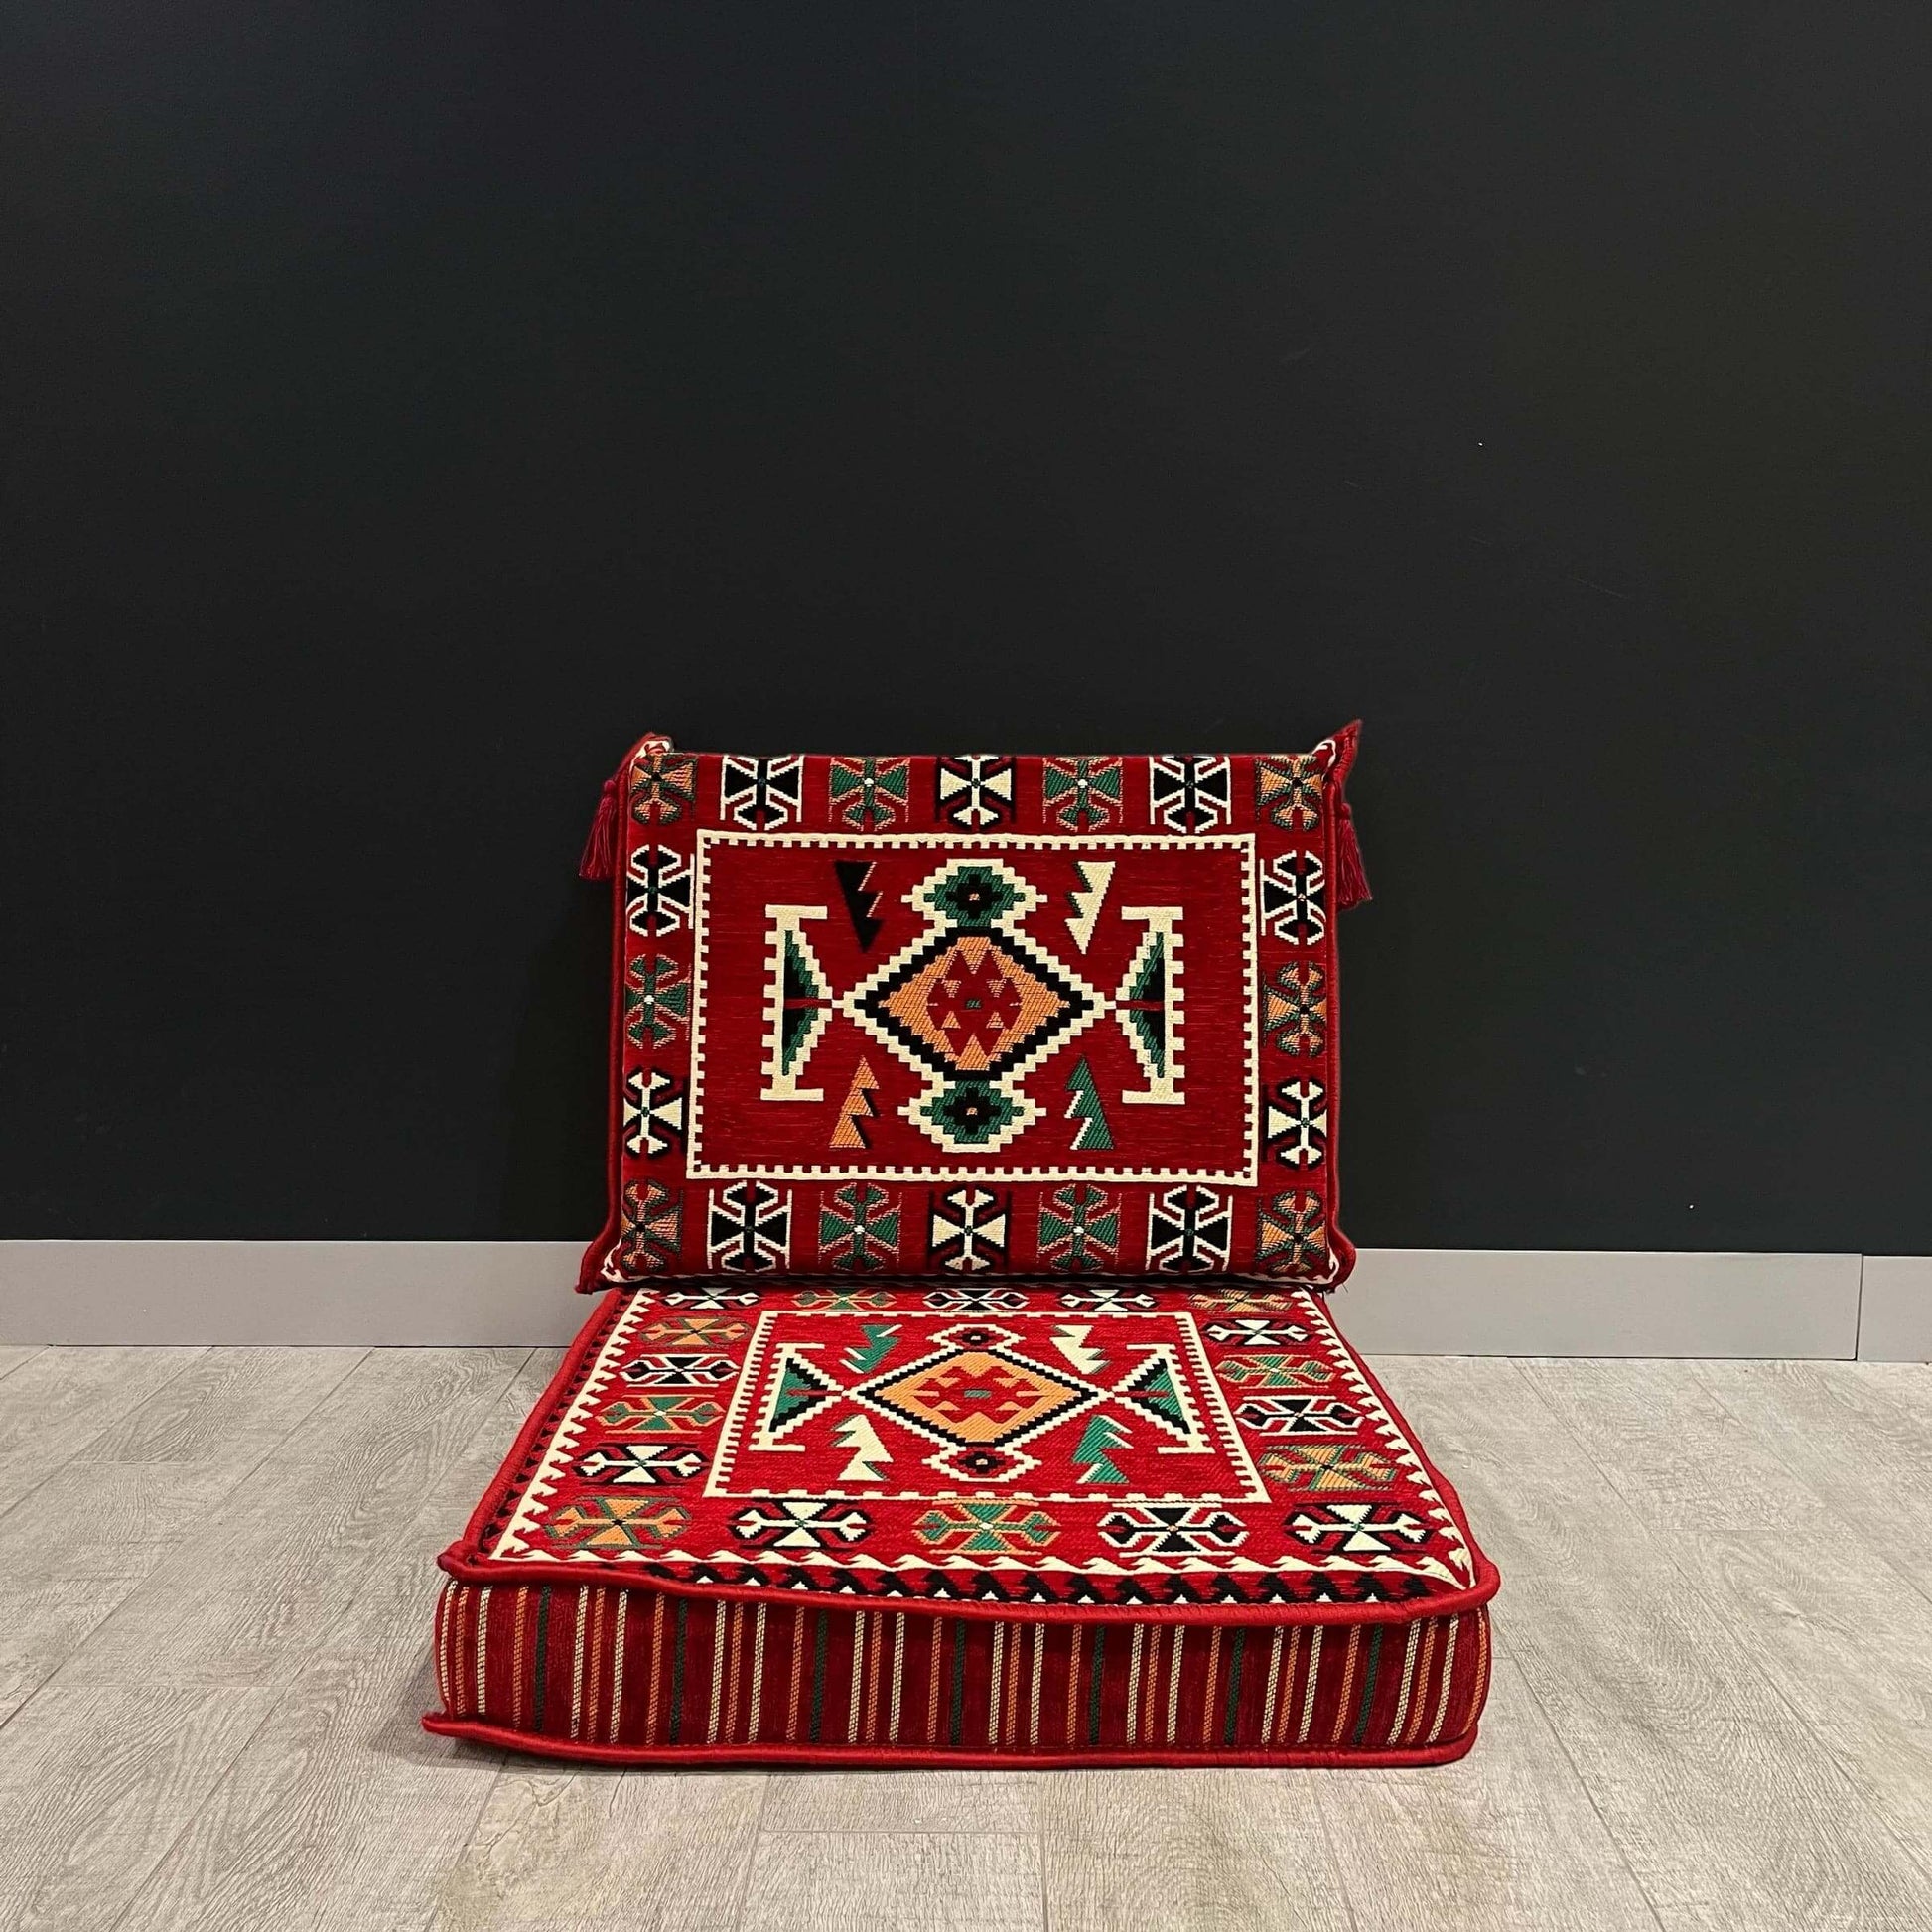 Authentic decorative and comfortable floor cushions Made in Turkiye, %100 Cotton, washable covers with firm sponge filling. 2 Piece Cushions, 1x 60x60cm, 1x 50x60cm Experience the elegance of Turkish seating arrangement with our exquisite Single Floor Cus